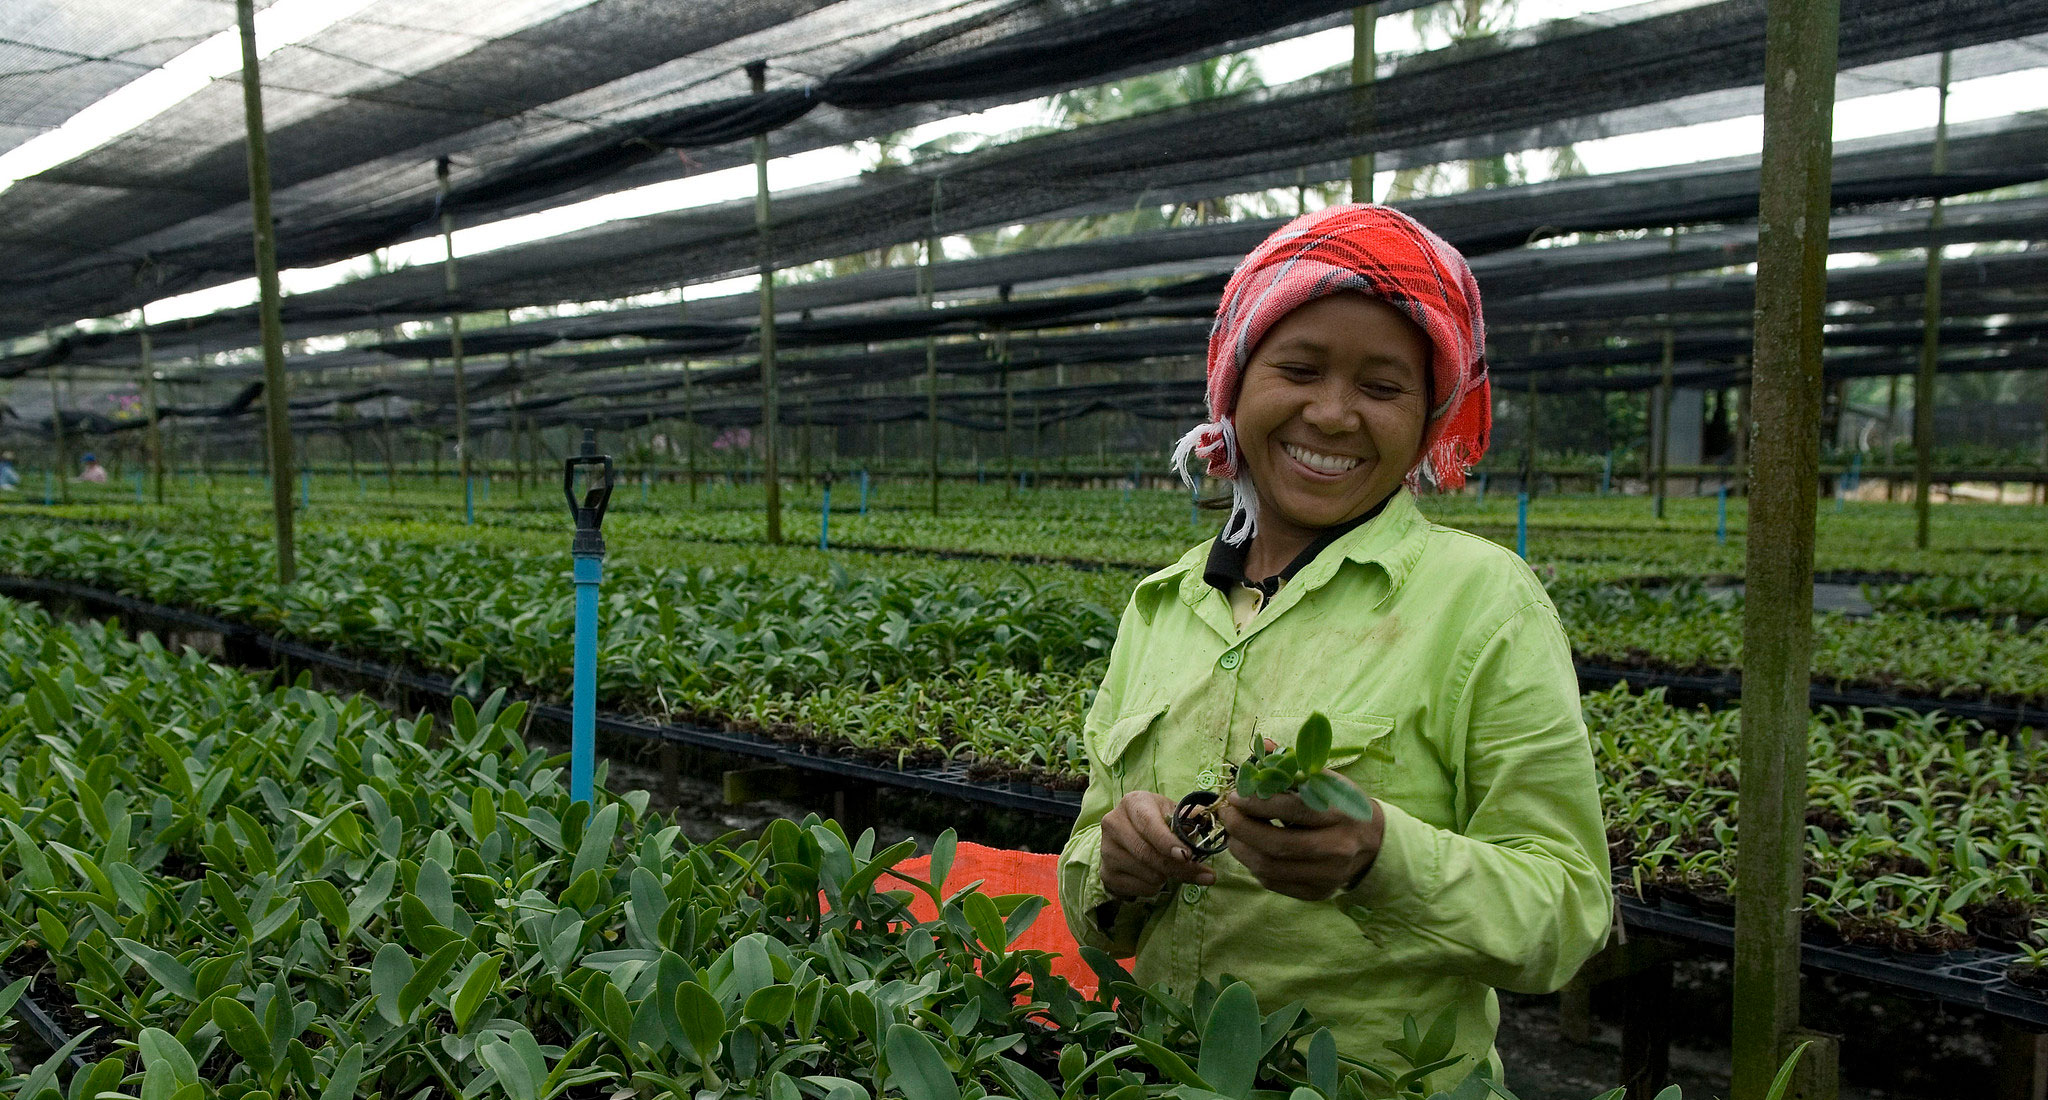 Young lady smiling wearing red headscarf and lime shirt, working in an orchid farm nursery (Thailand)